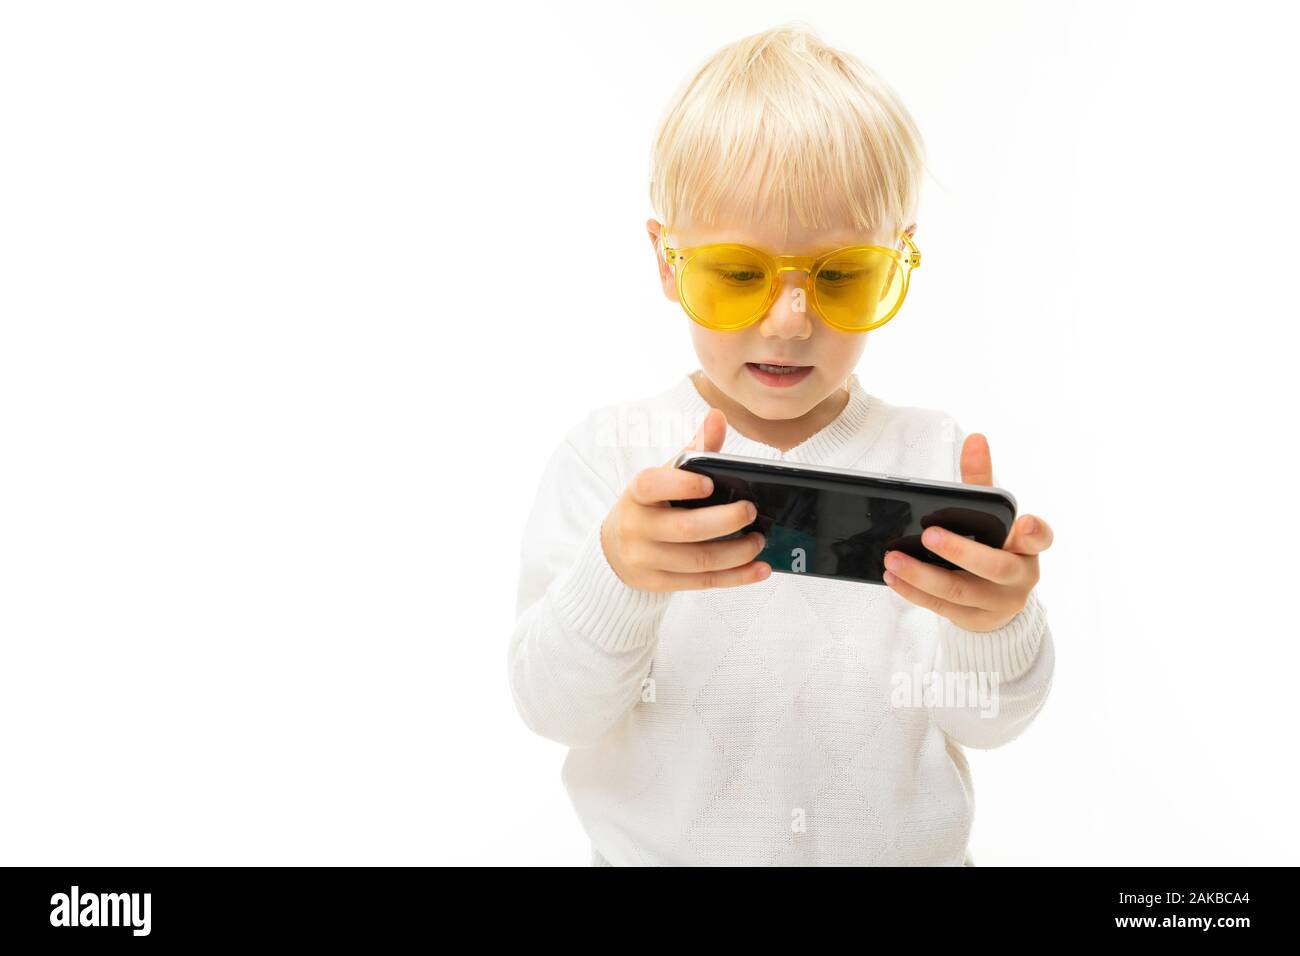 Caucasian blond child plays a game on the phone in a horizontal position on a white background Stock Photo